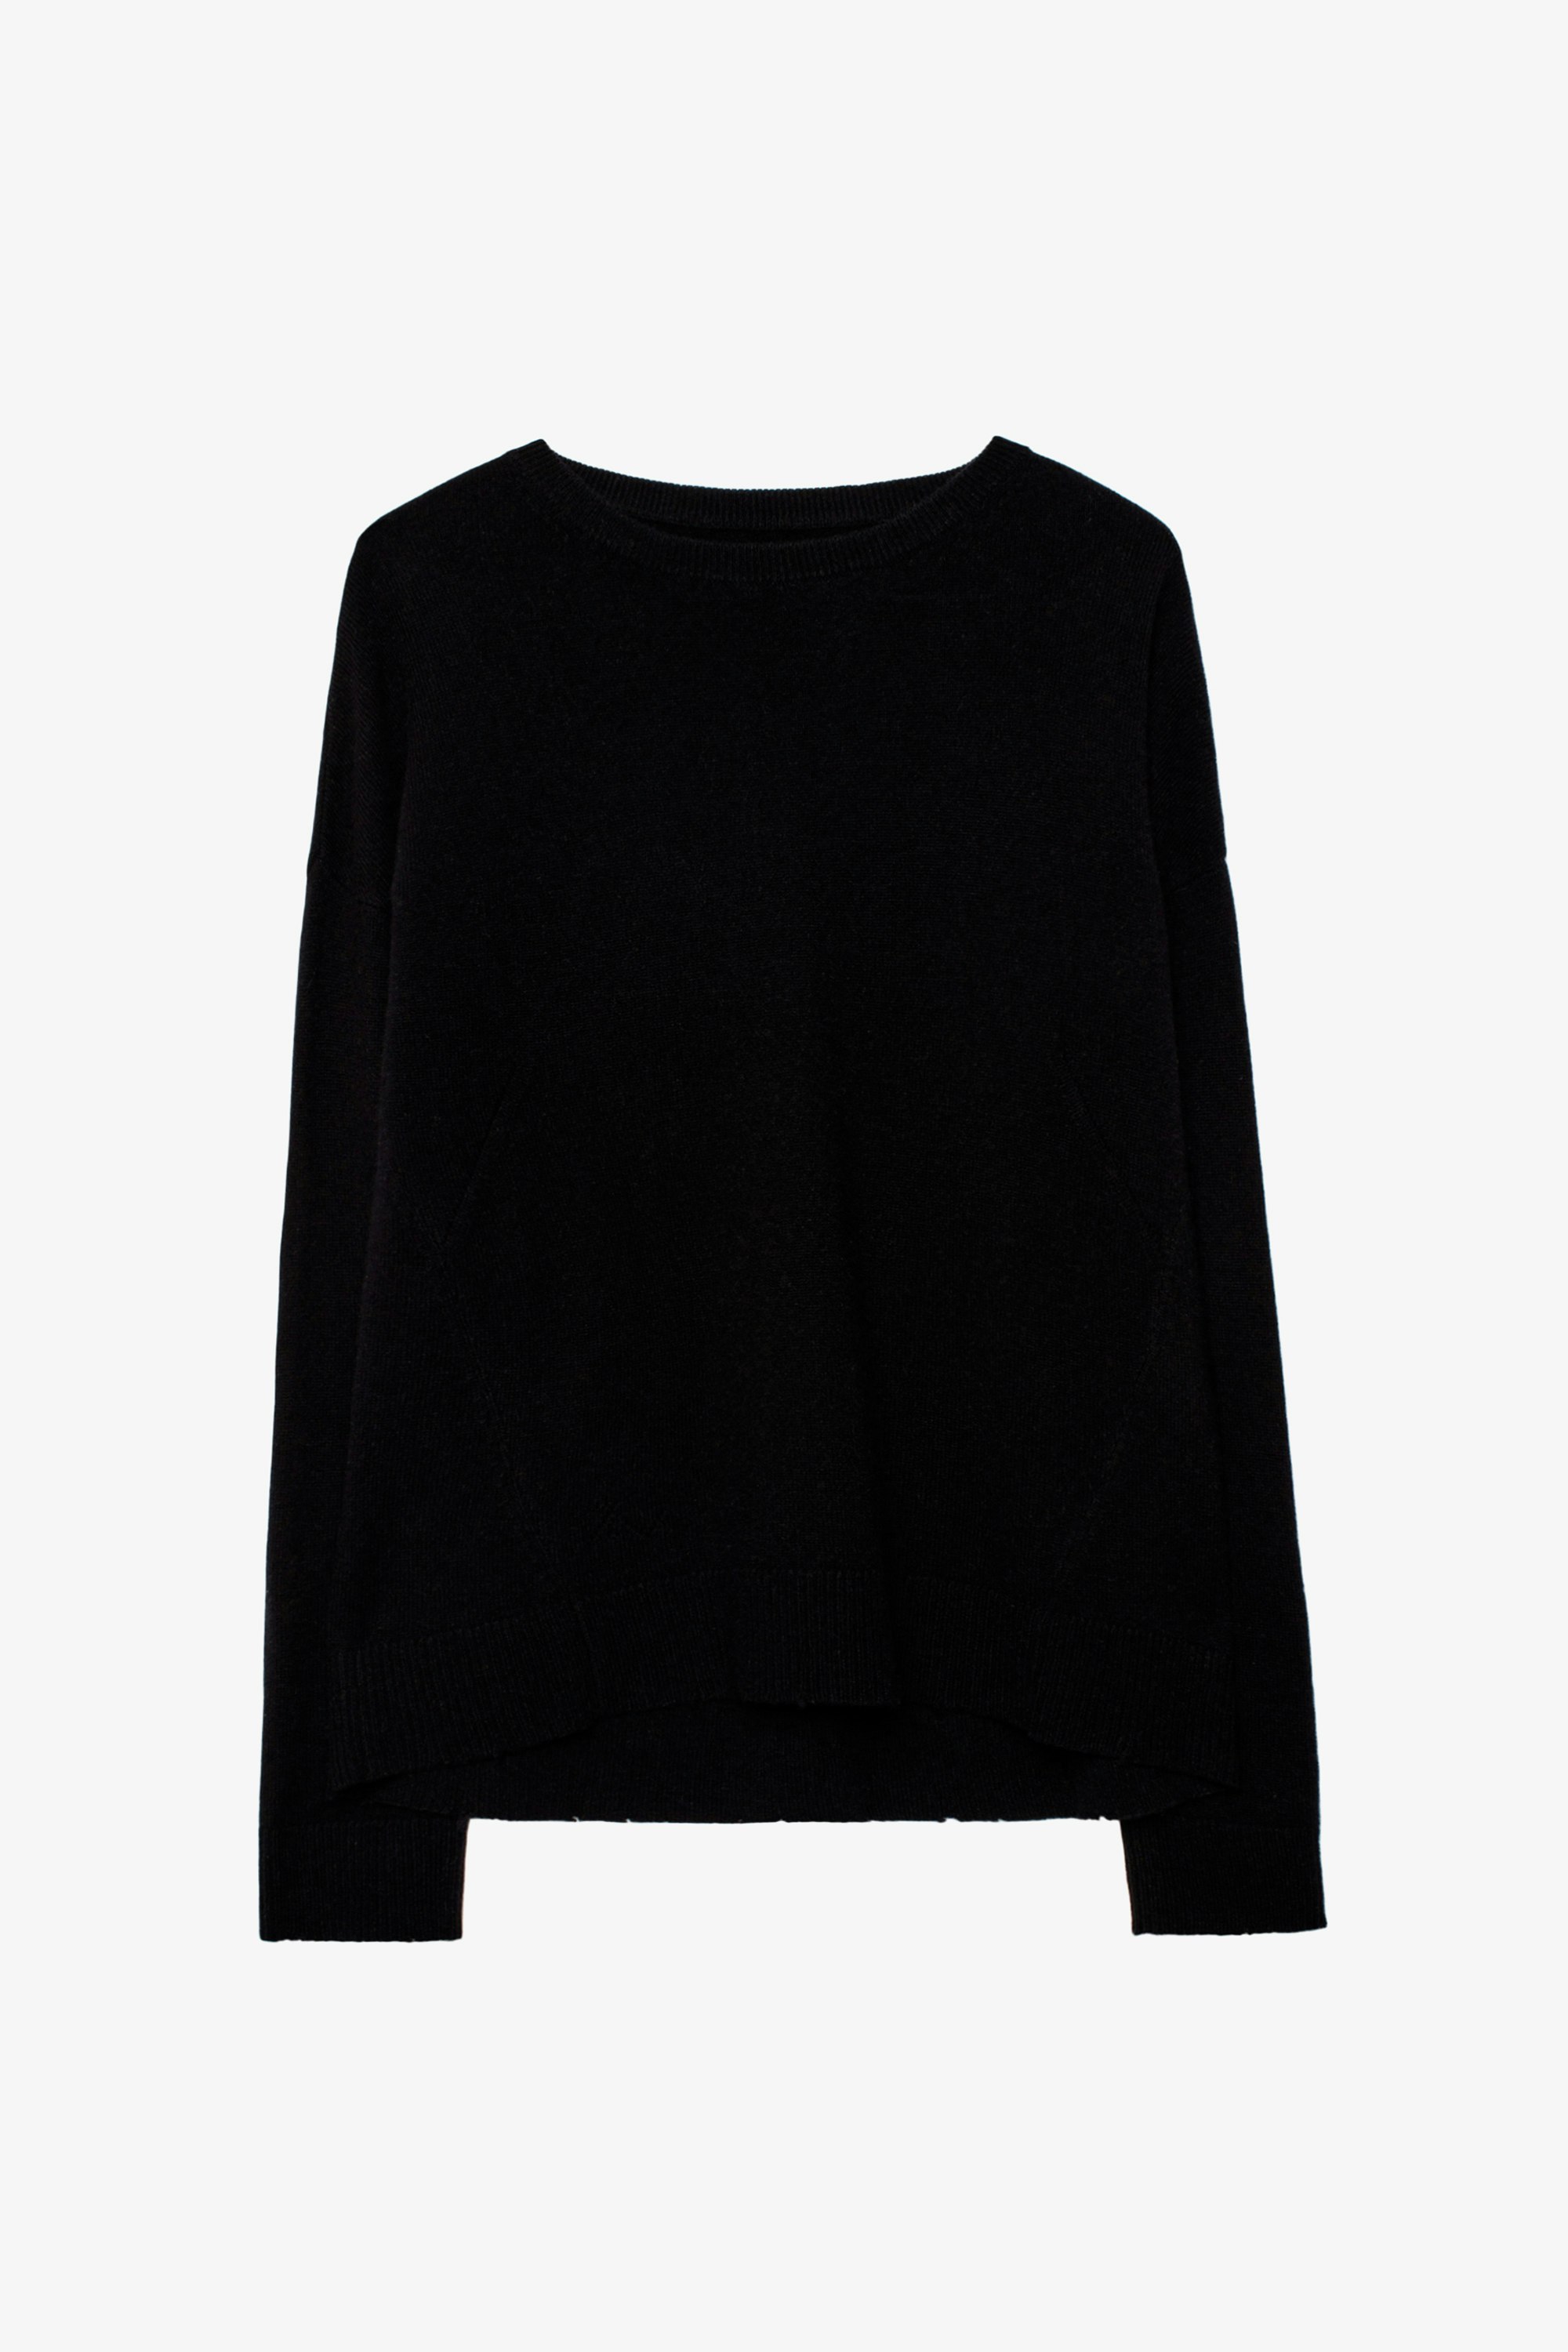 Cici Patch Cashmere Sweater - Zadig&Voltaire Women’s black sweater in 100% cashmere